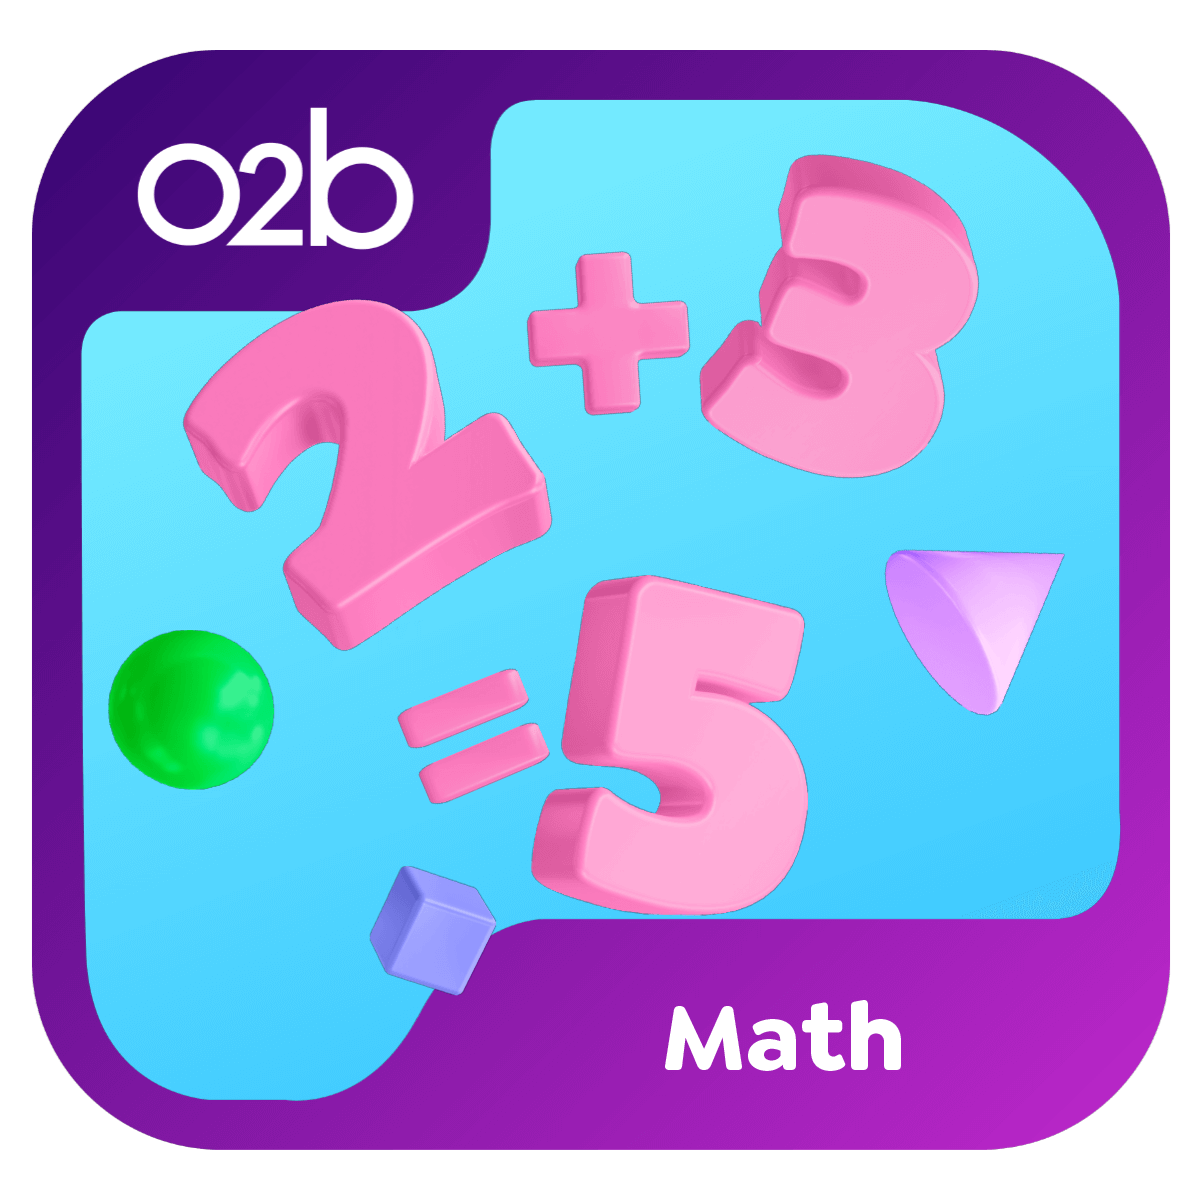 2 + 3 = 5 mathematic equation with green sphere, purple cube, and light purple cylinder on blue background. O2B - Math